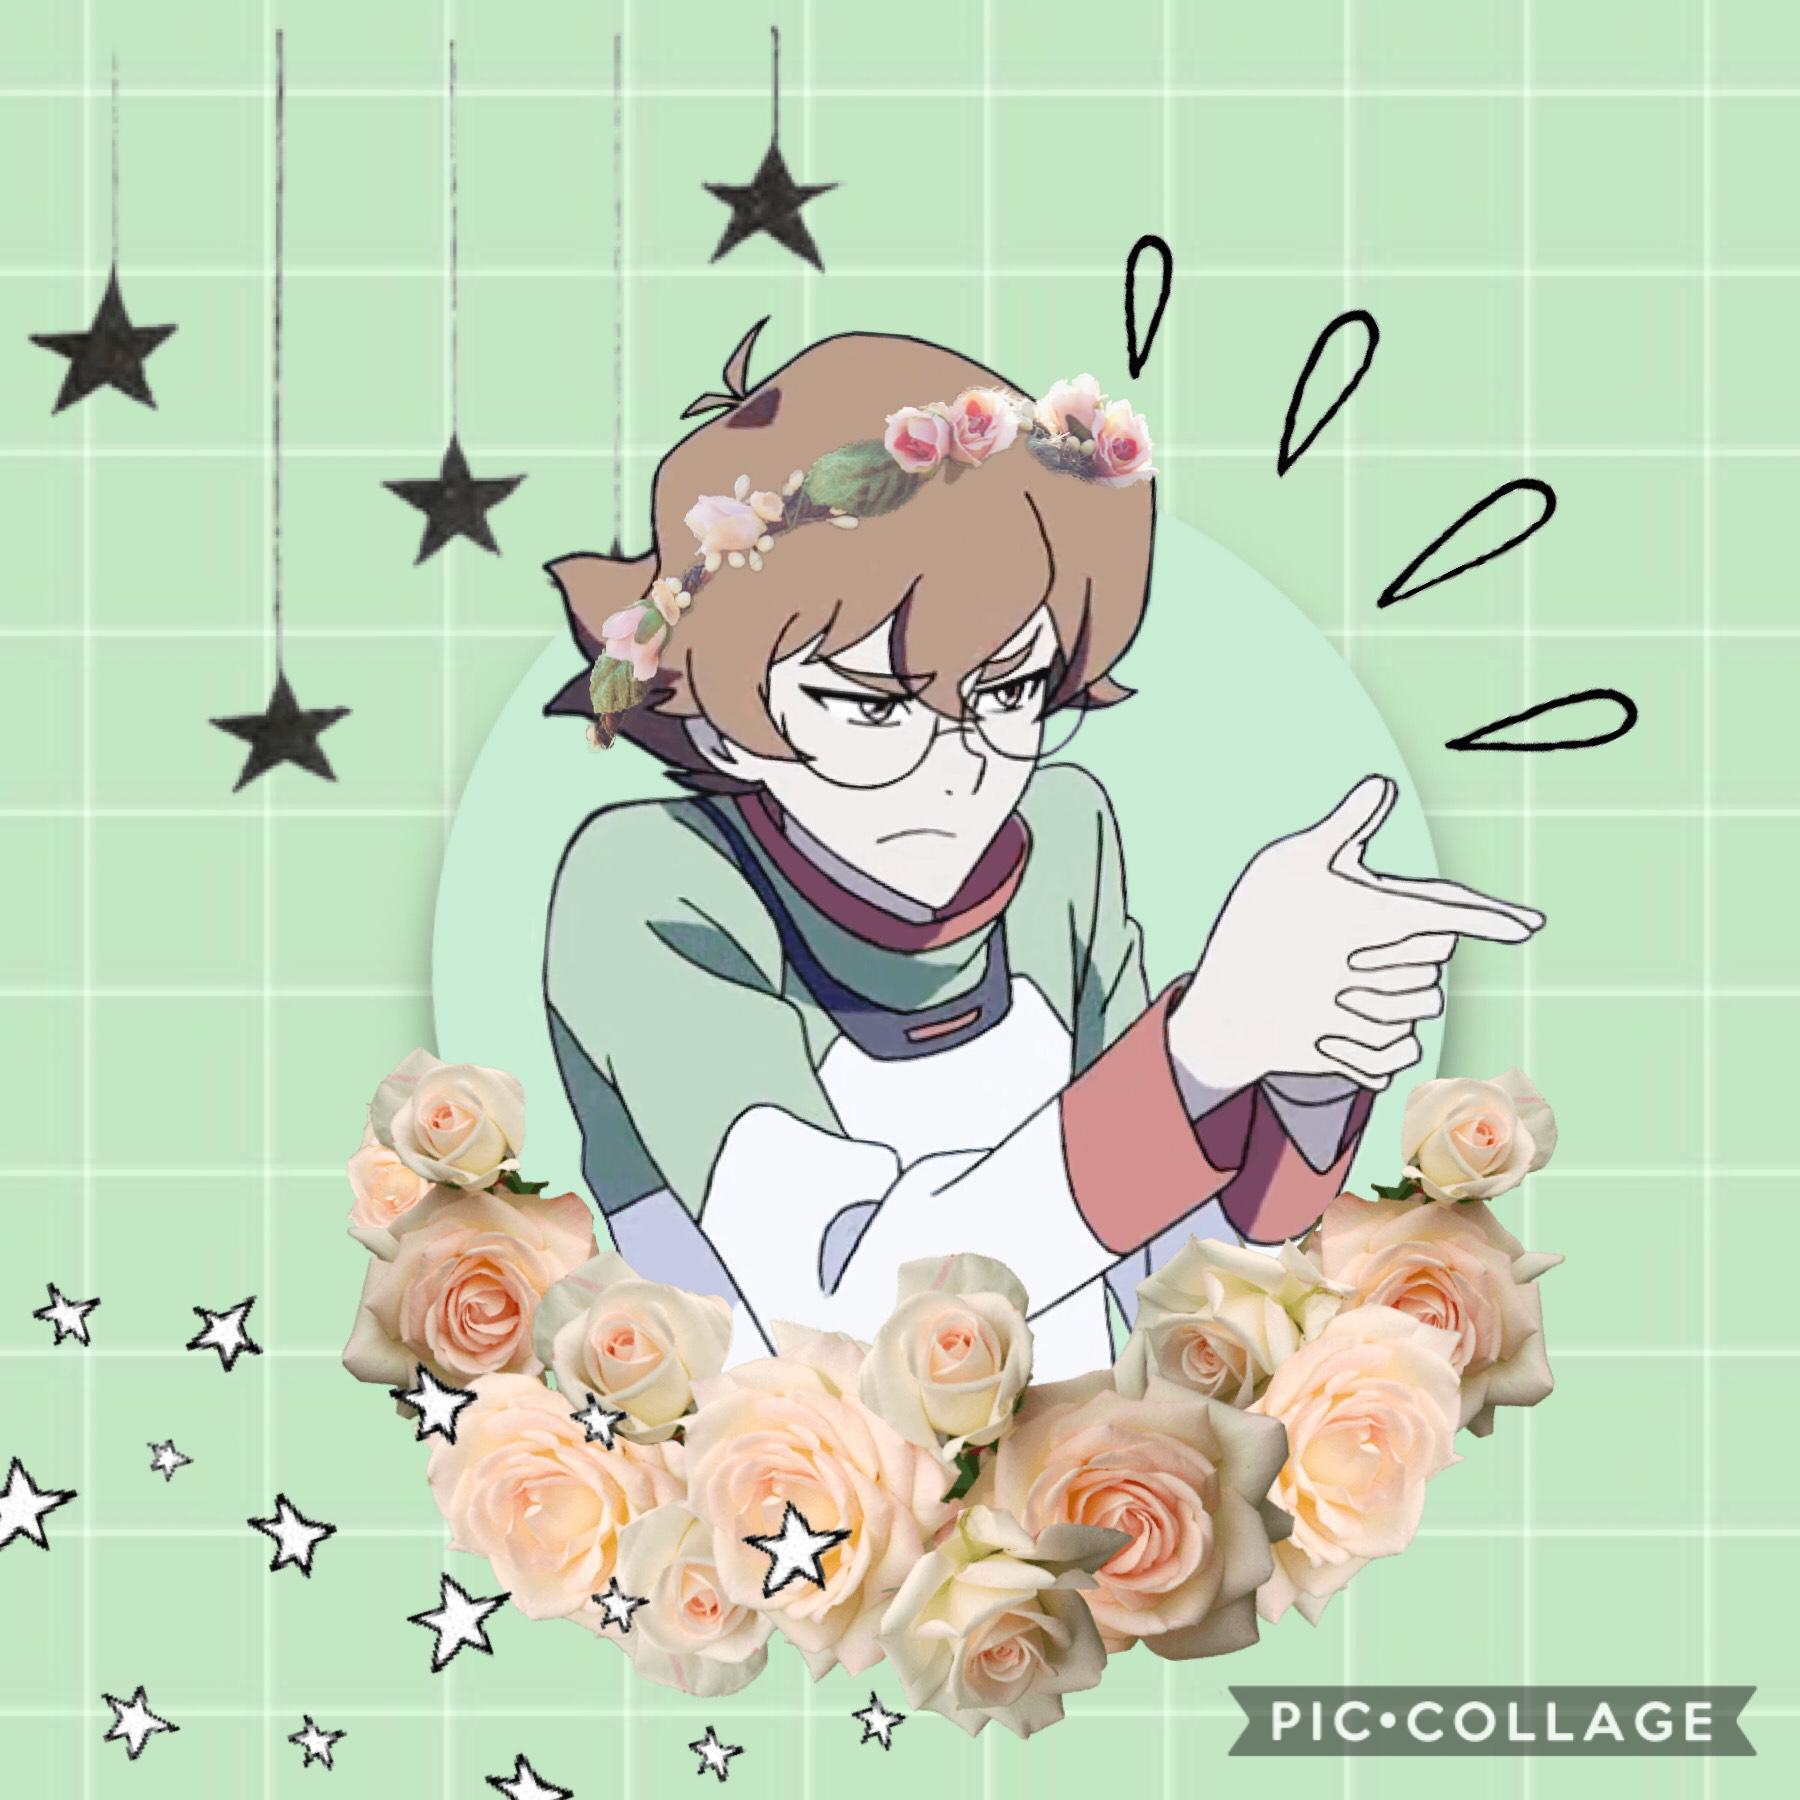 editing with just PC! tap!
edit of pidge gunderson, feel free to collect and of the pngs, i made this JUST by using pc, and i’m pretty proud lol ☆〜（ゝ。∂）